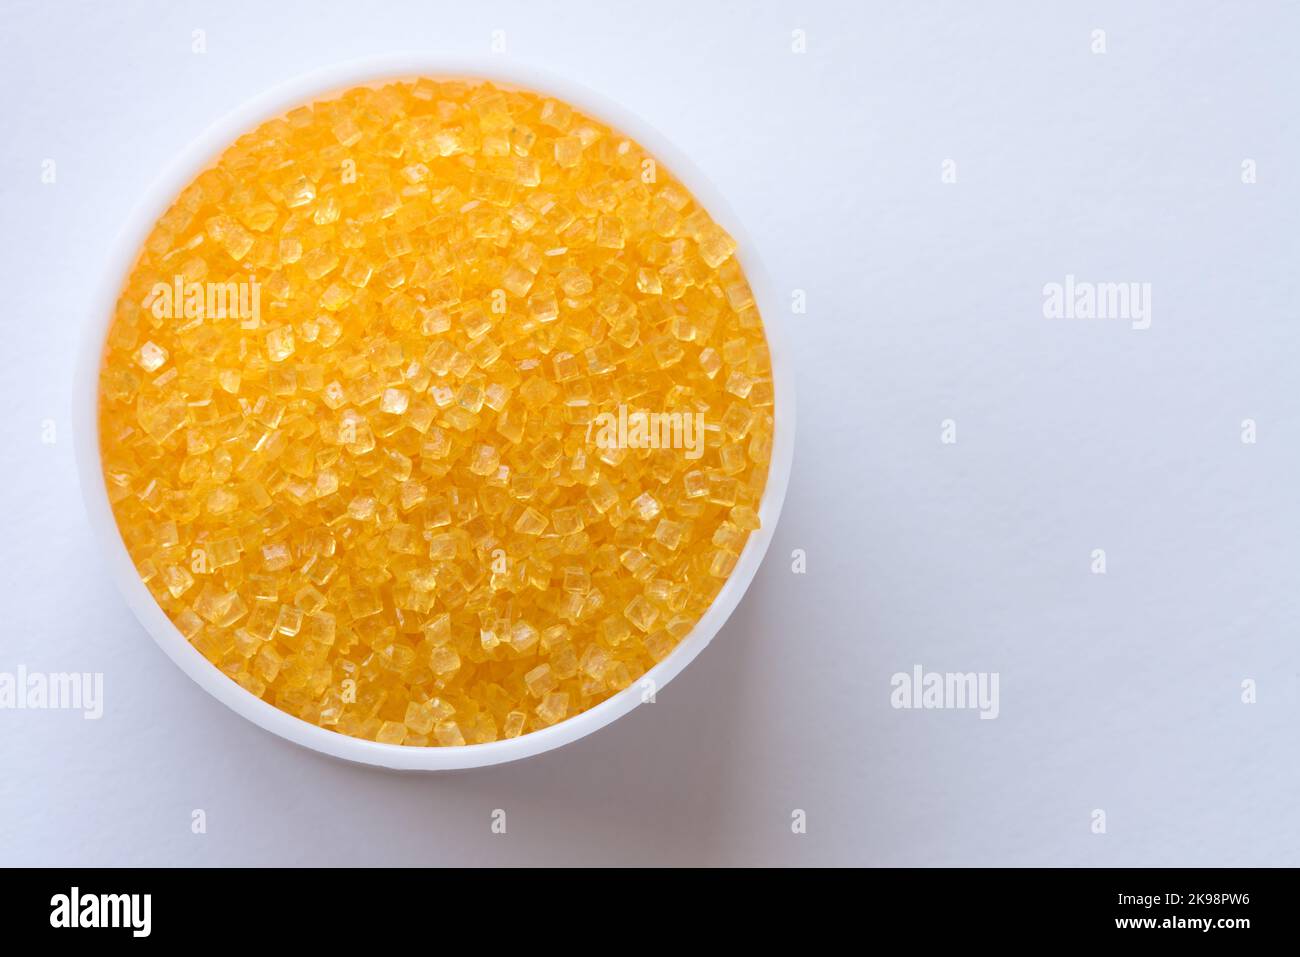 Yellow Sugar Crystals Spilled from a Jar Stock Photo